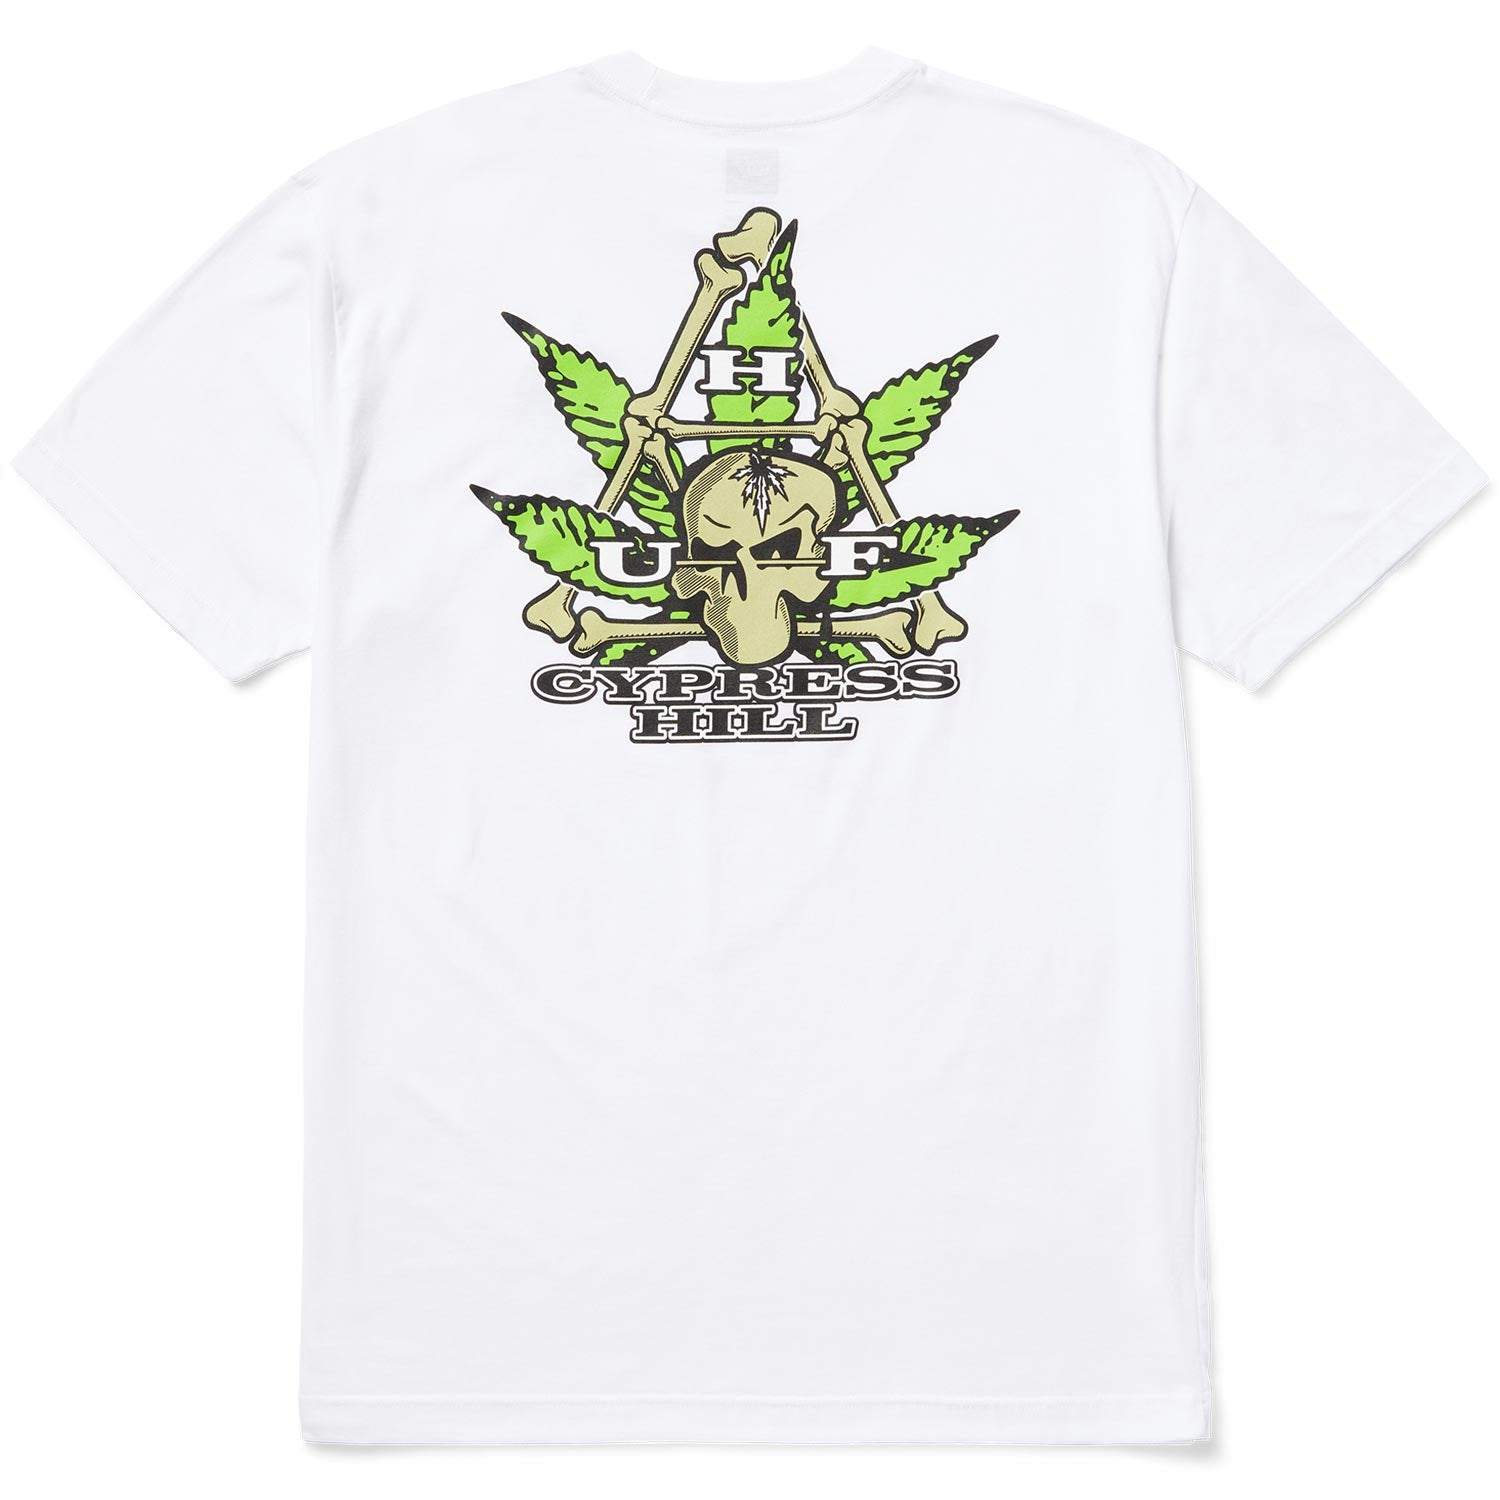 Huf X Cypress Hill Triangle T-Shirt - White - Mens Graphic T-Shirt by Huf